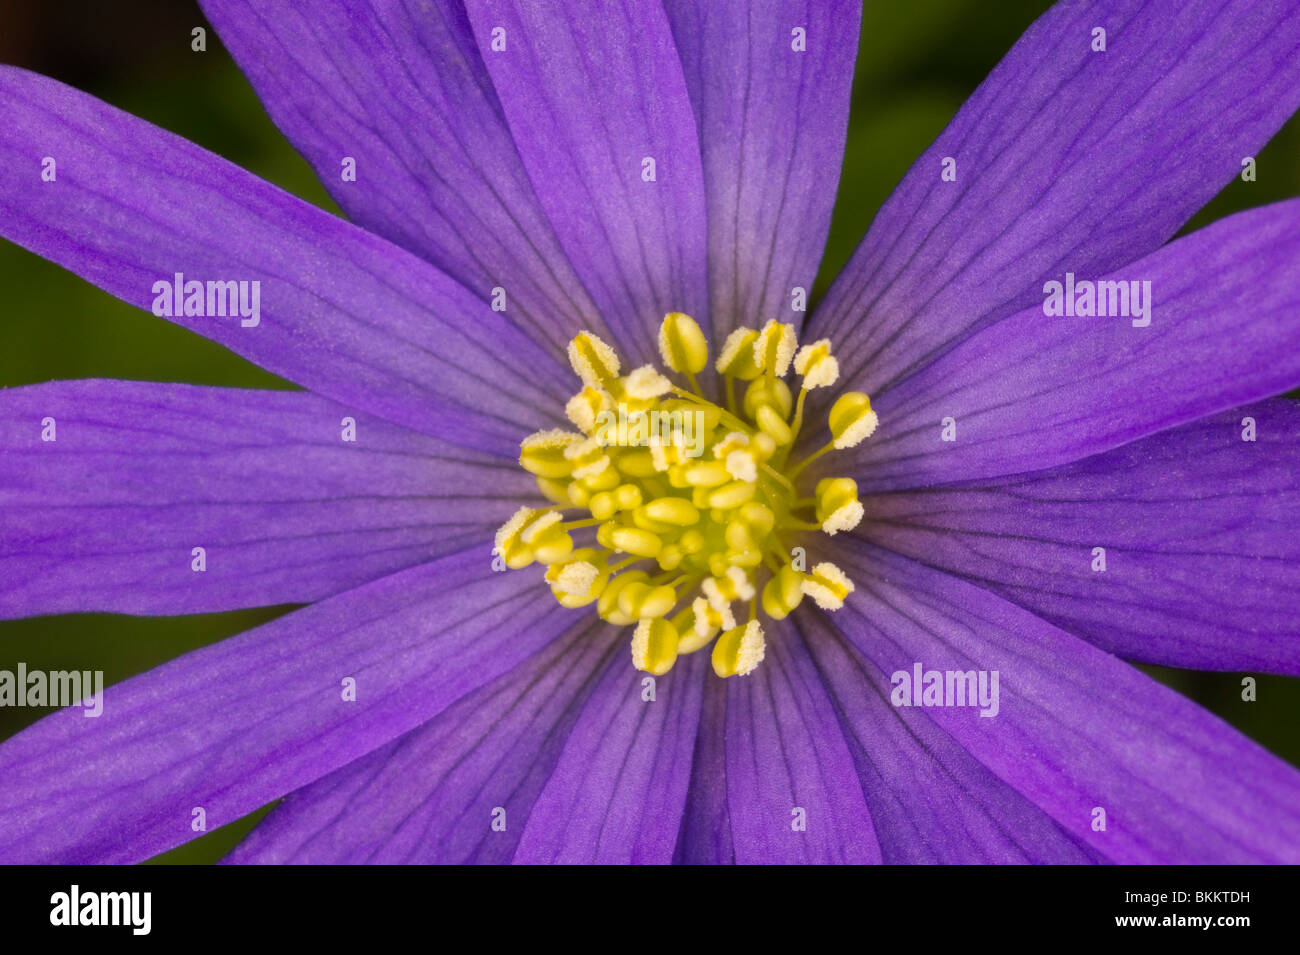 Purple anemone flower fully open in daytime with yellow pollen on central cluster of stamen and anthers Stock Photo